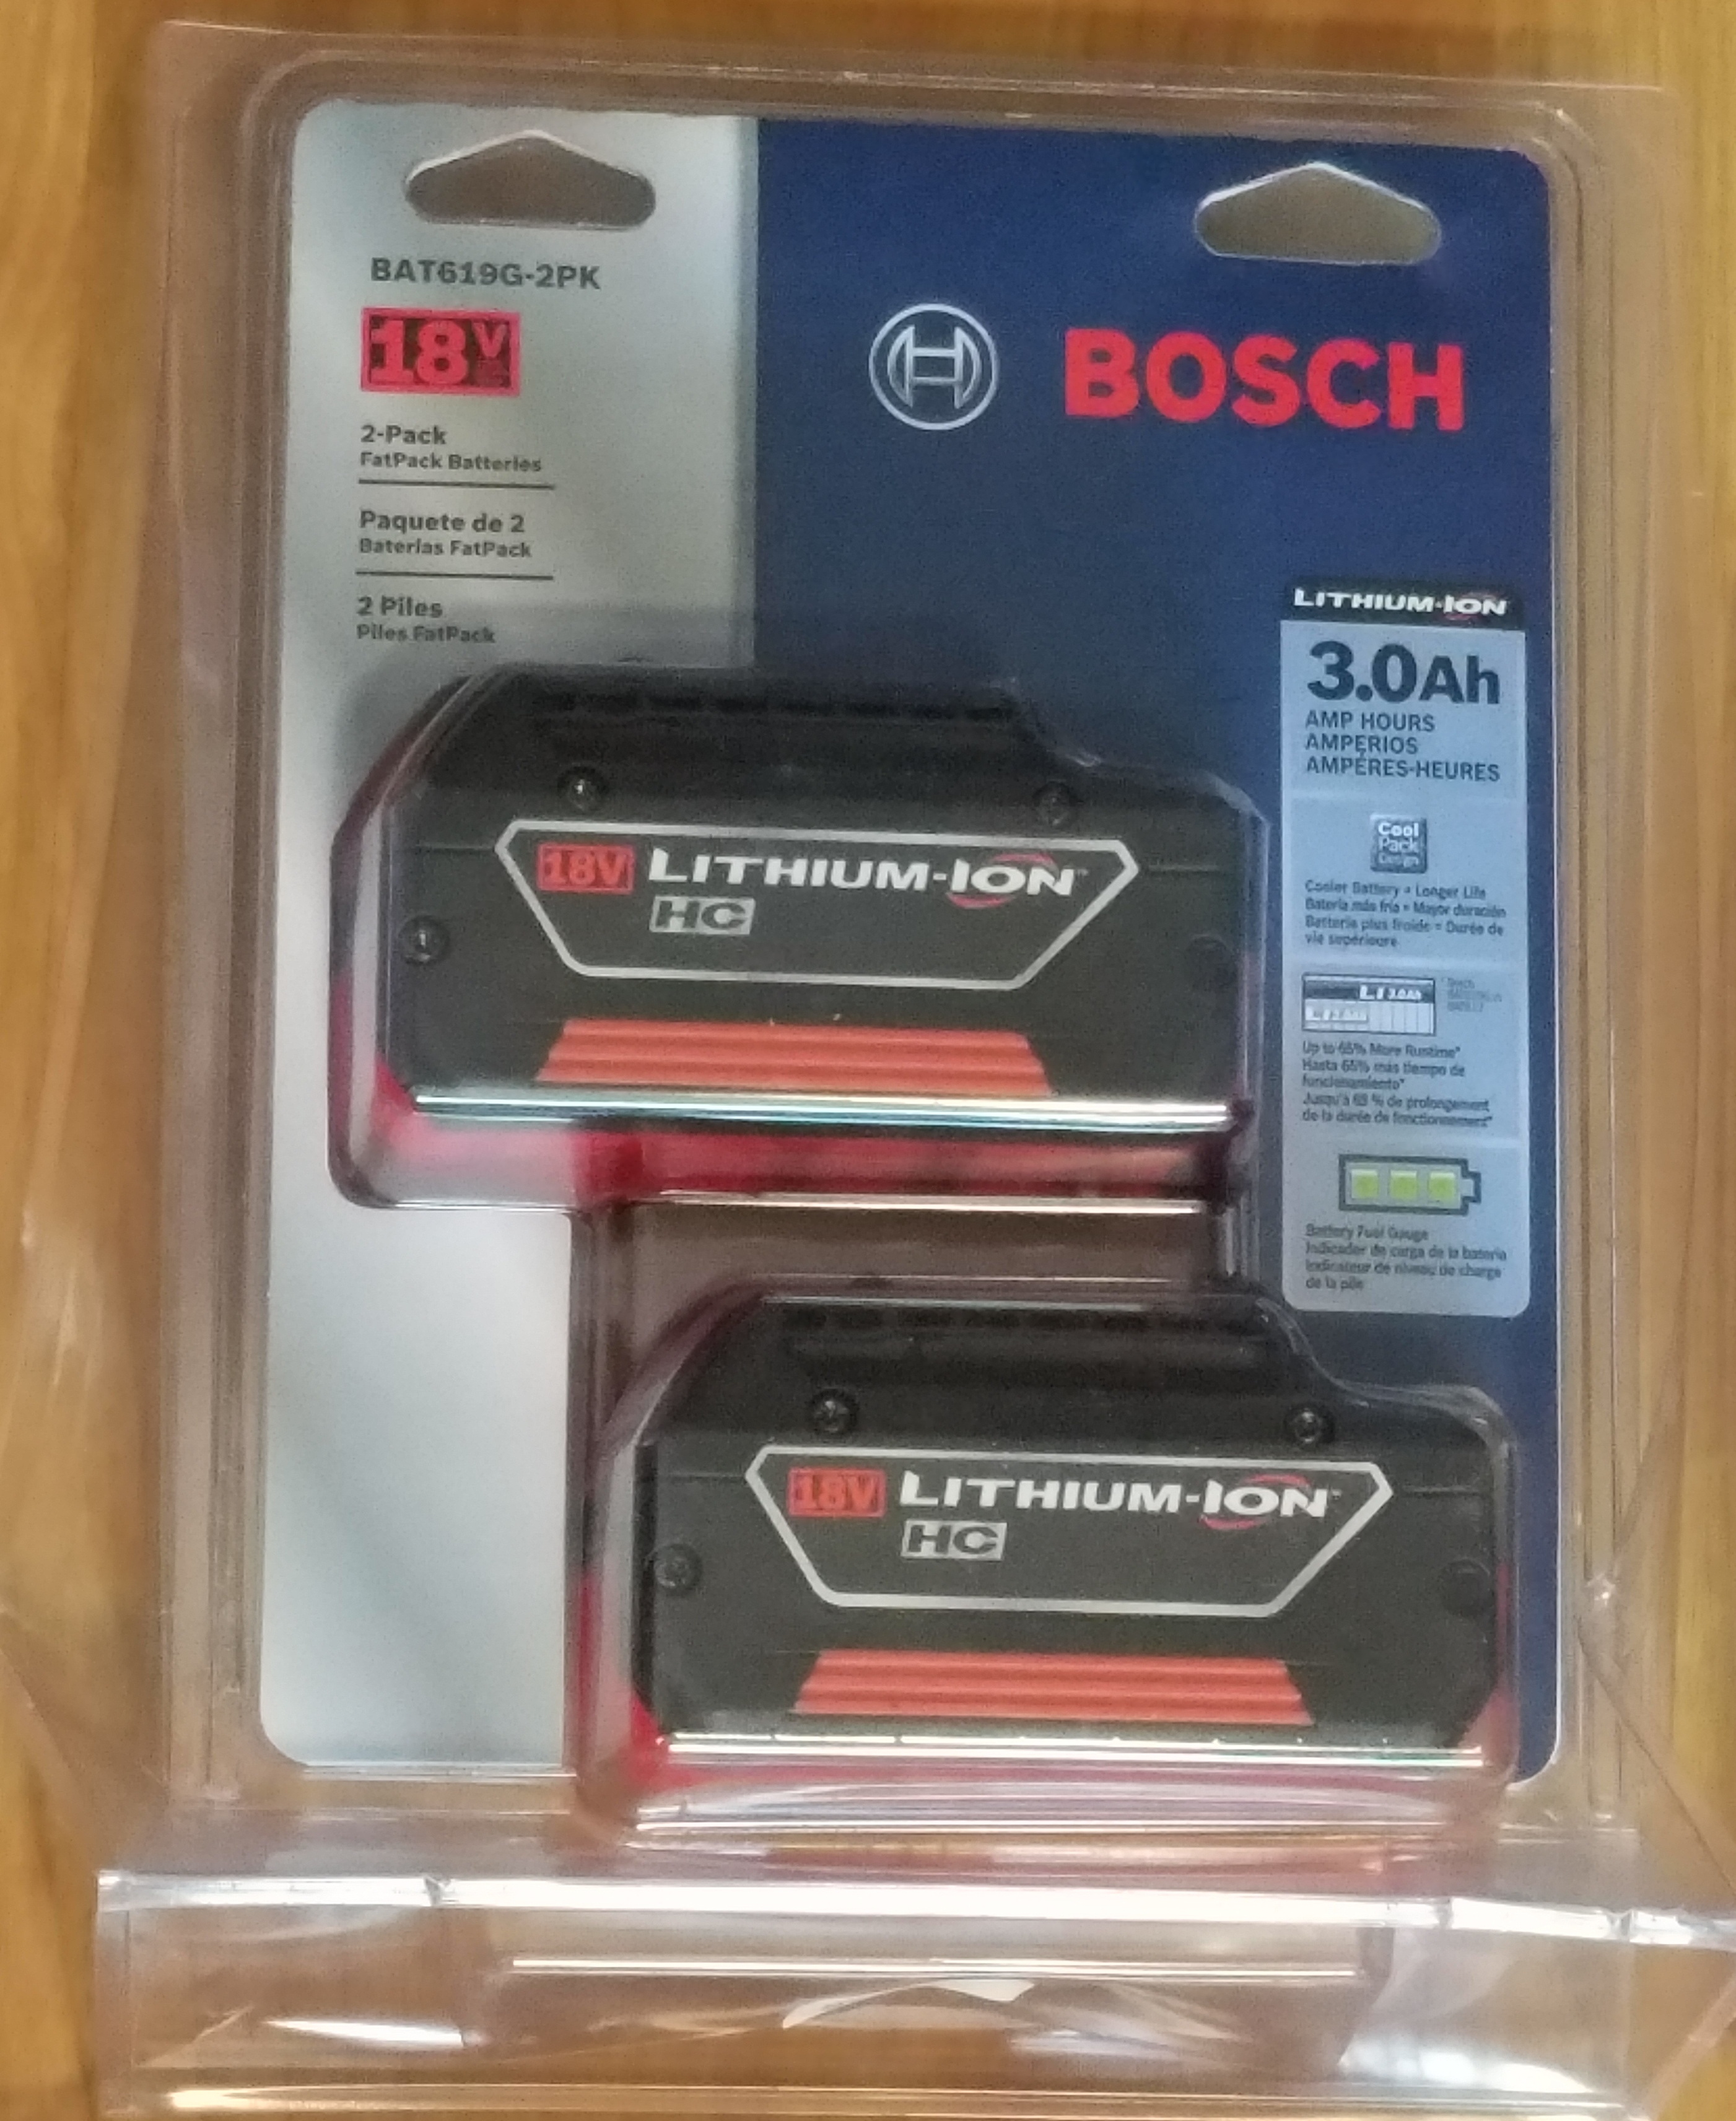 Bosch 18-V 2 Amp-Hour; Lithium Battery in the Power Tool Batteries